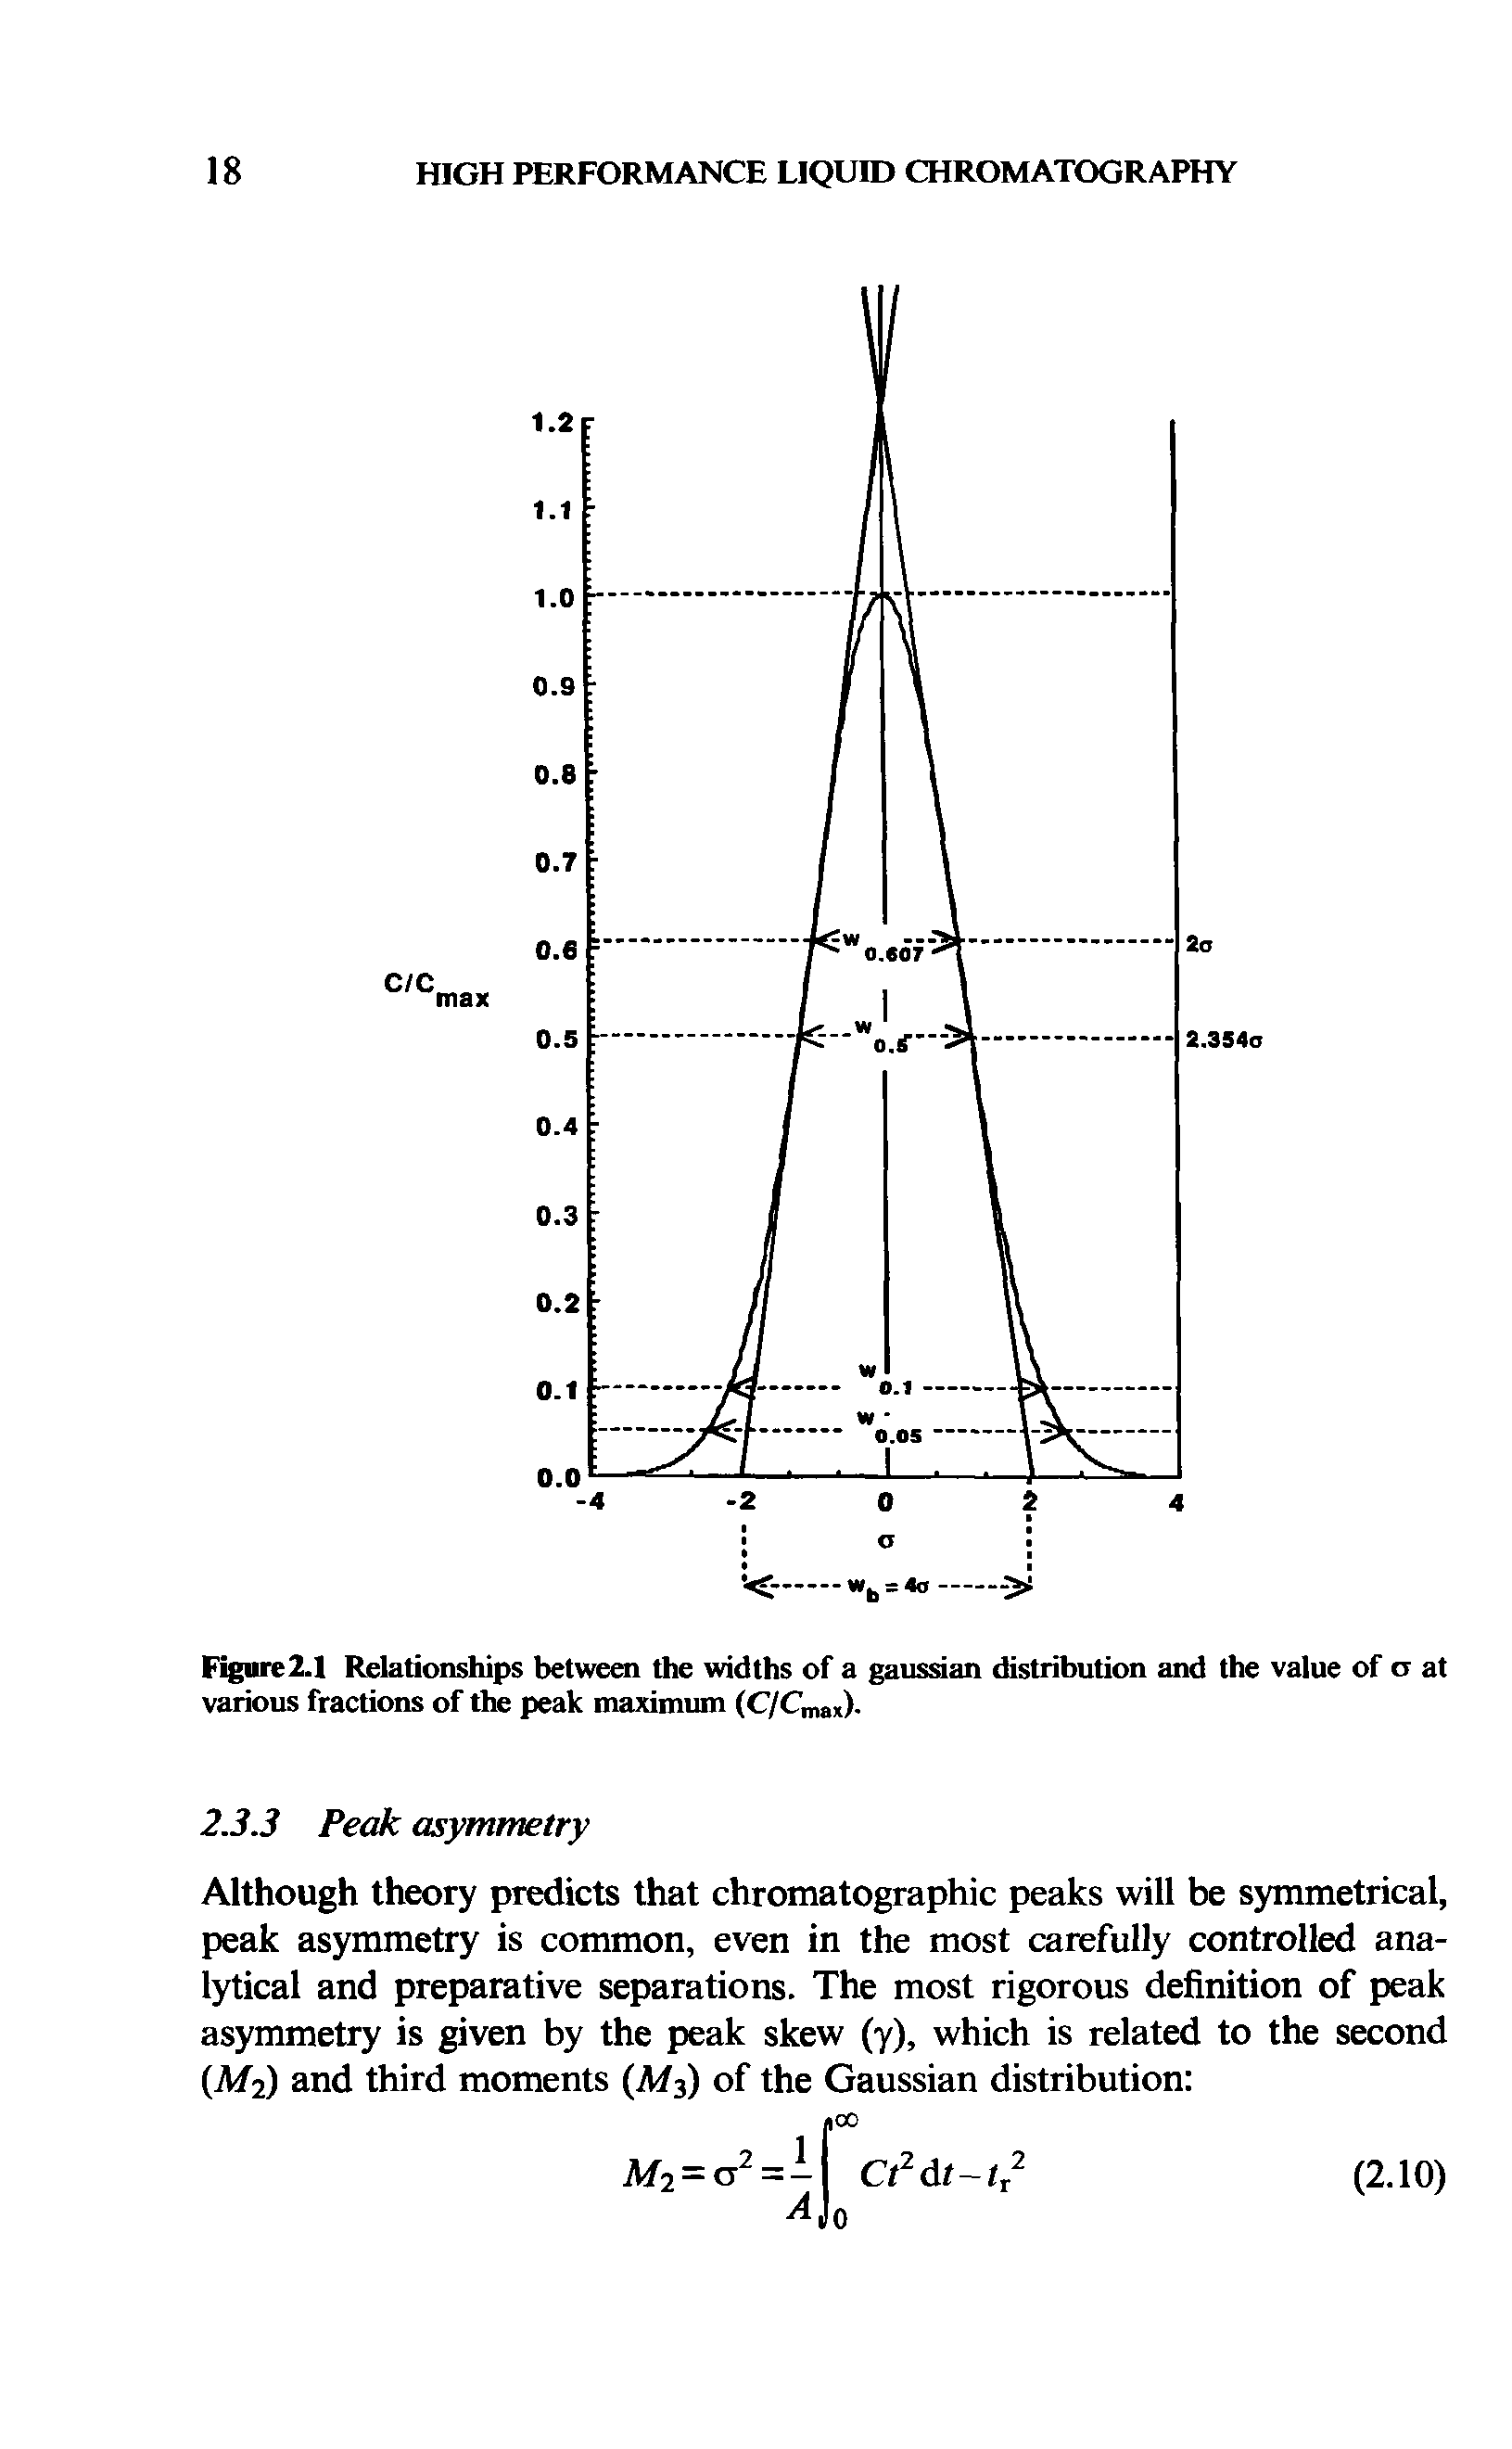 Figure2.1 Relationships between the widths of a gaussian distribution and the value of a at various fractions of the peak maximum (C/Cmax)-...